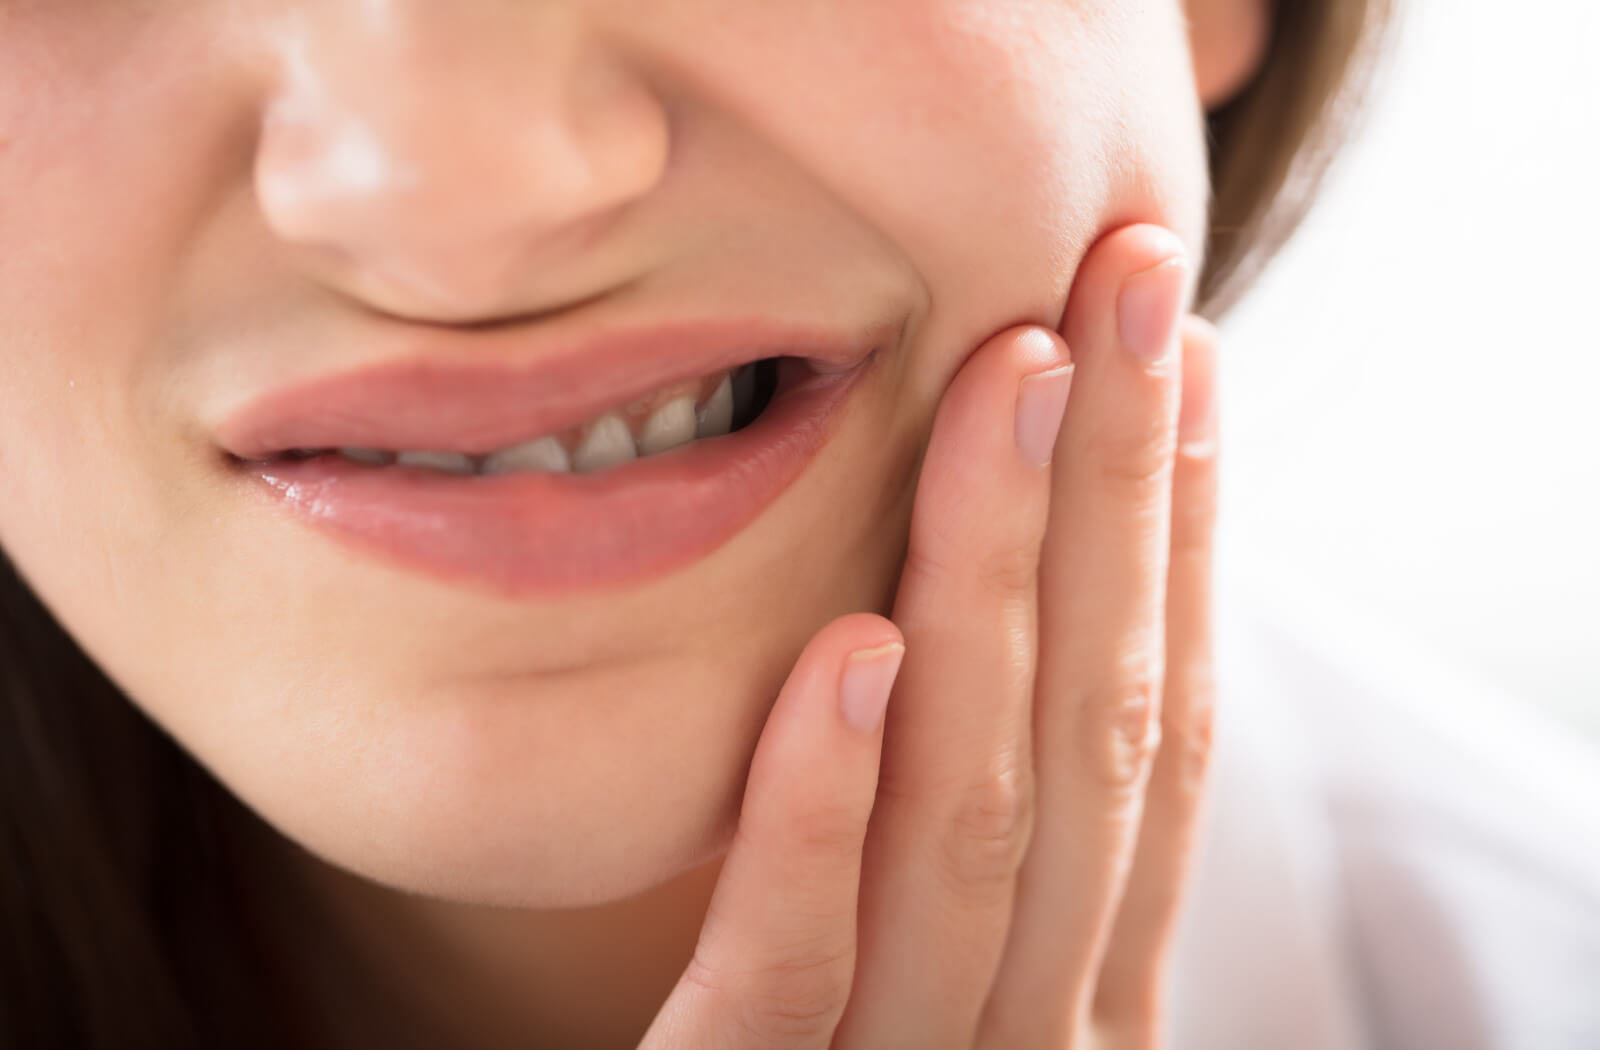 A close-up image of a woman touching her face while experiencing toothache discomfort.